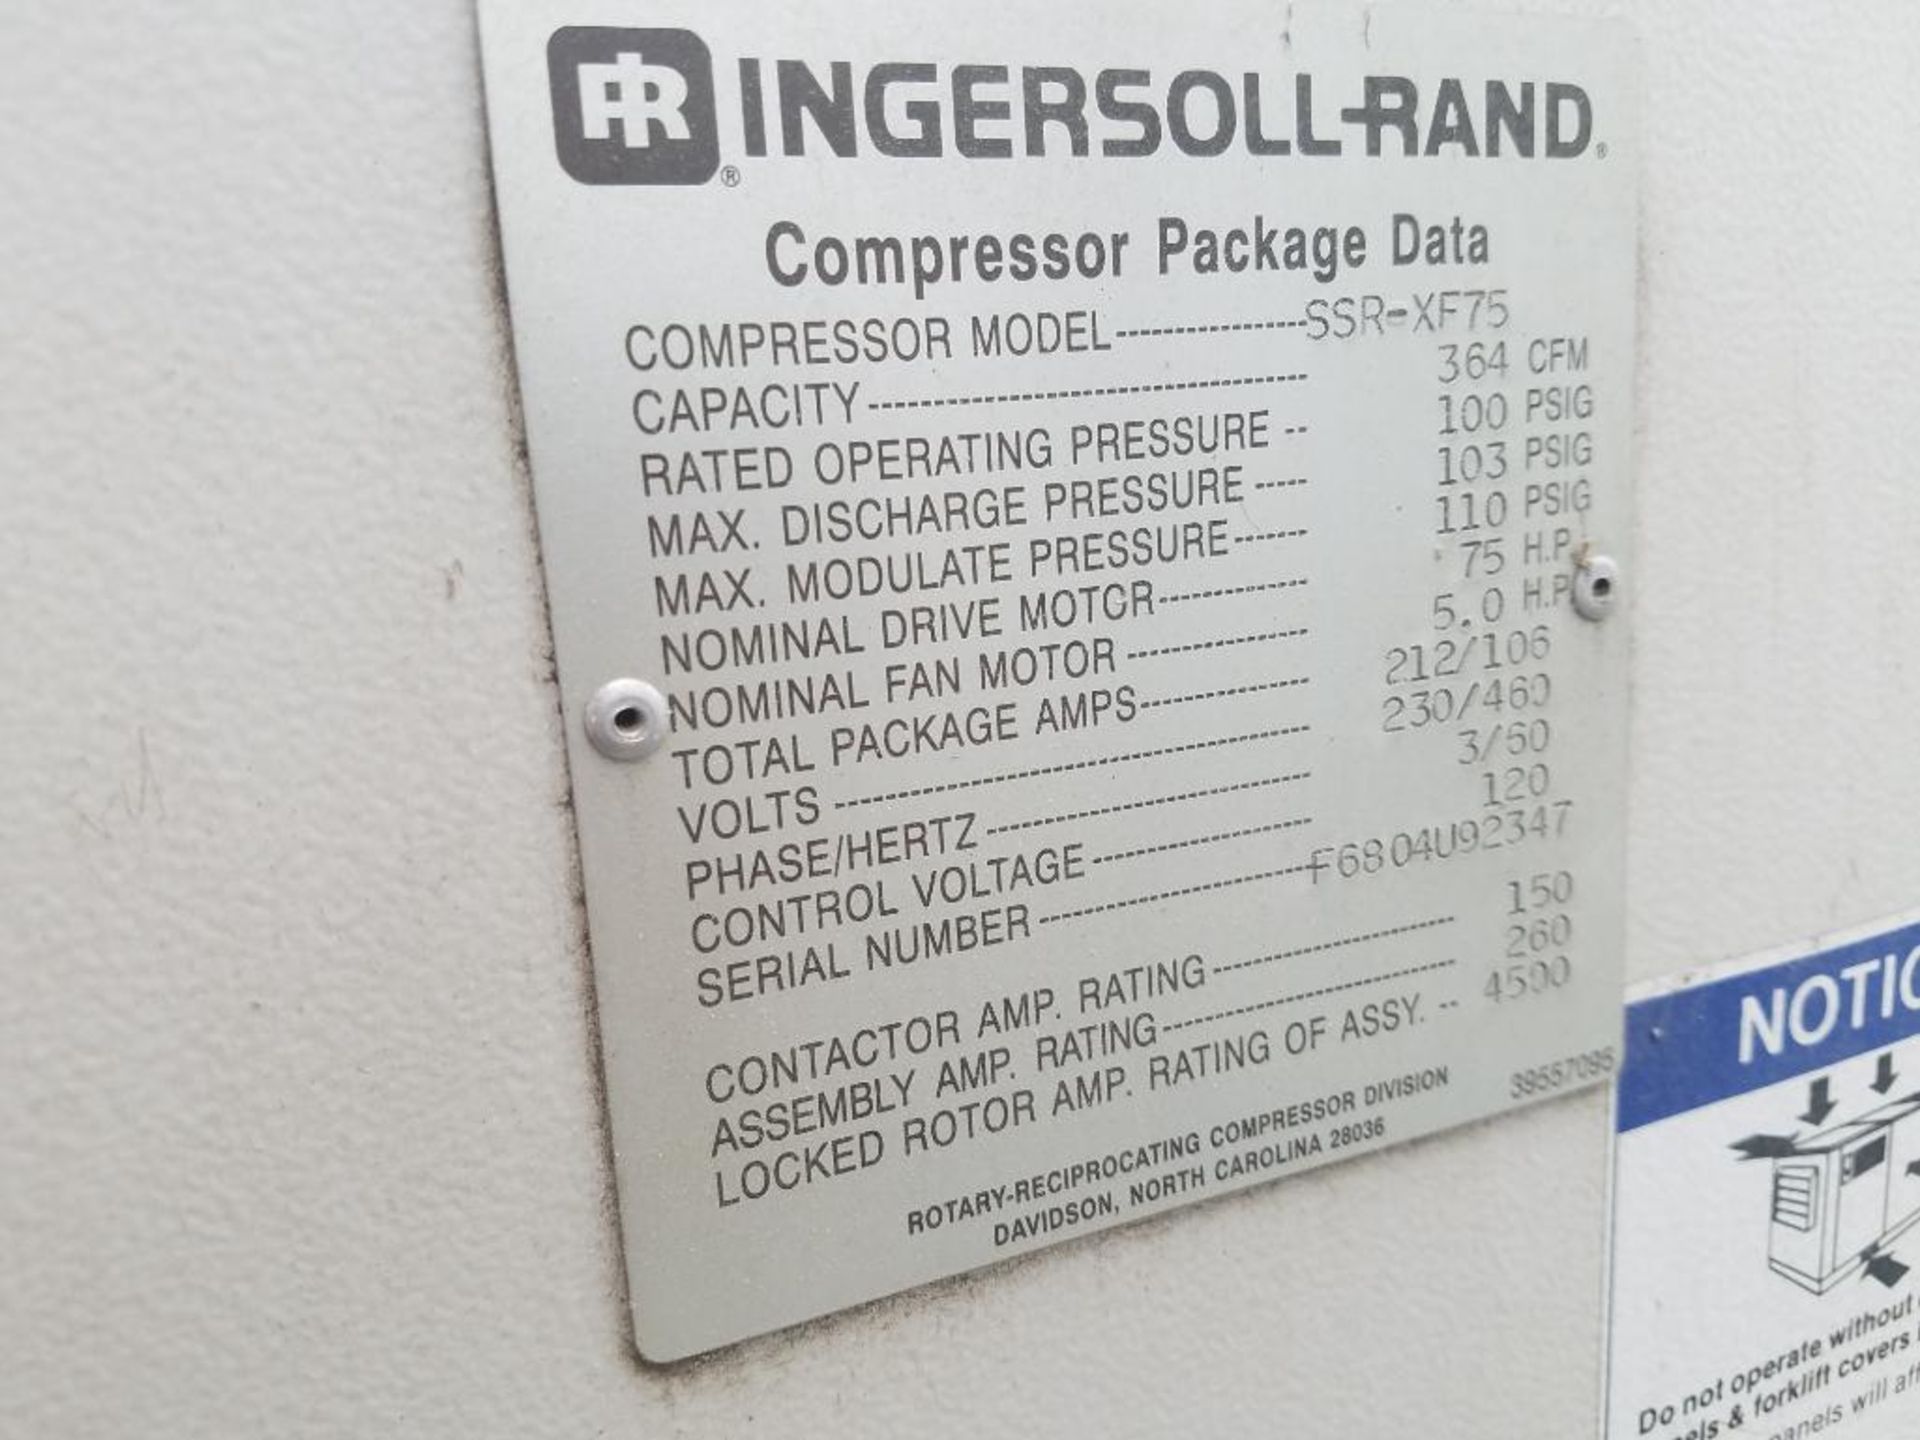 Ingersoll Rand rotary screw air compressor, 75 hp - Image 4 of 4